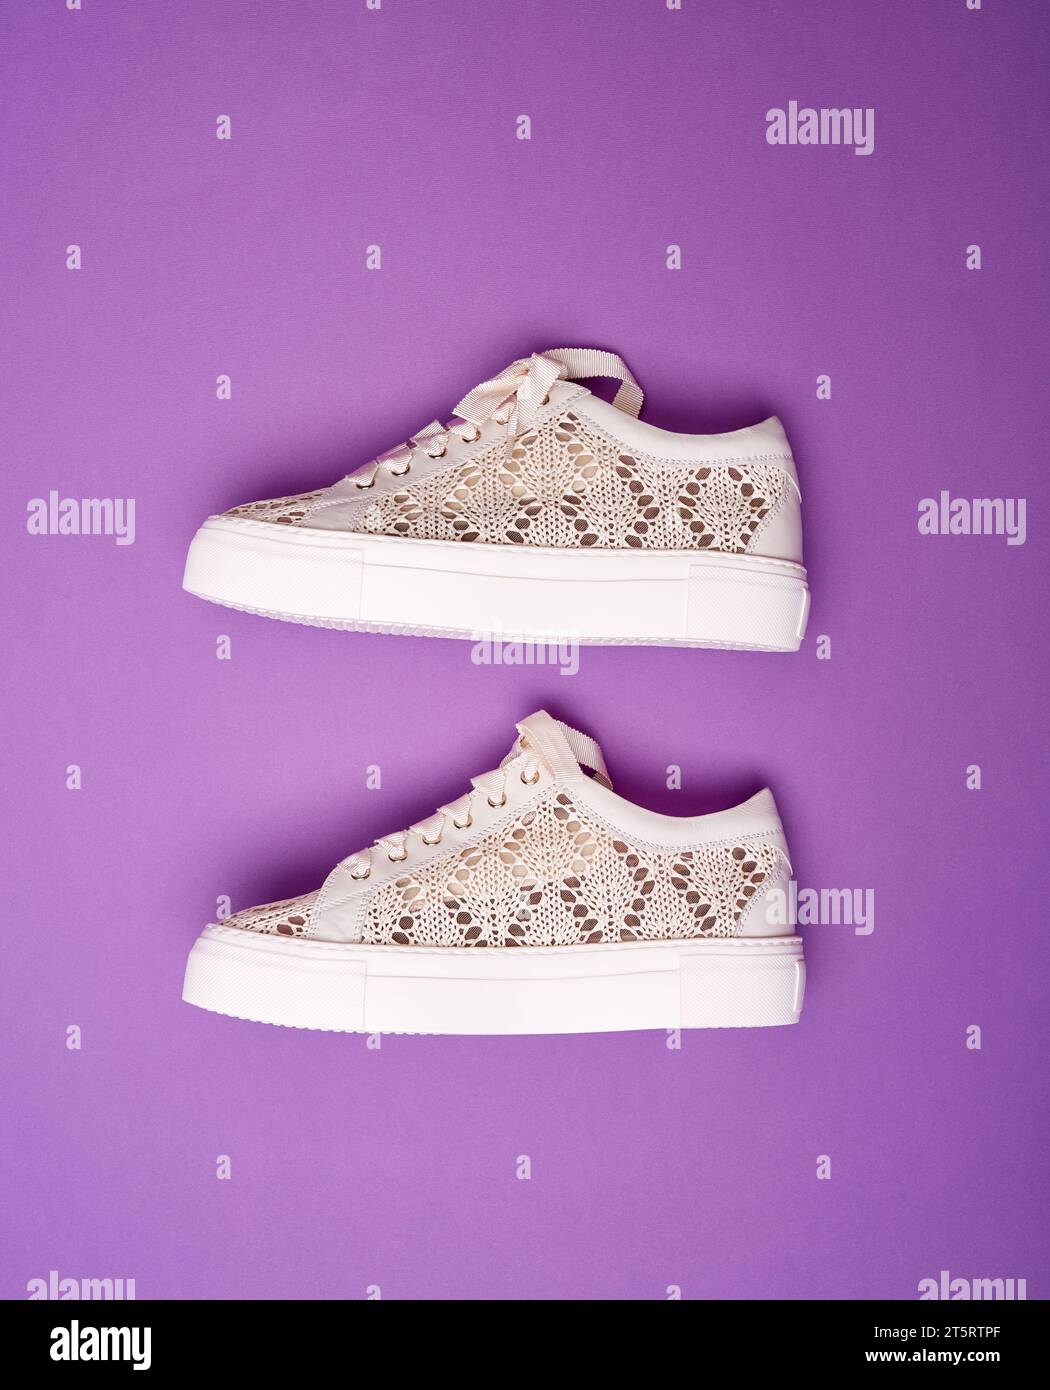 https://c8.alamy.com/comp/2T5RTPF/trendy-beige-knitted-design-sneakers-with-white-thick-rubber-soles-on-a-bright-purple-background-shoe-sale-clearance-ad-concept-2T5RTPF.jpg